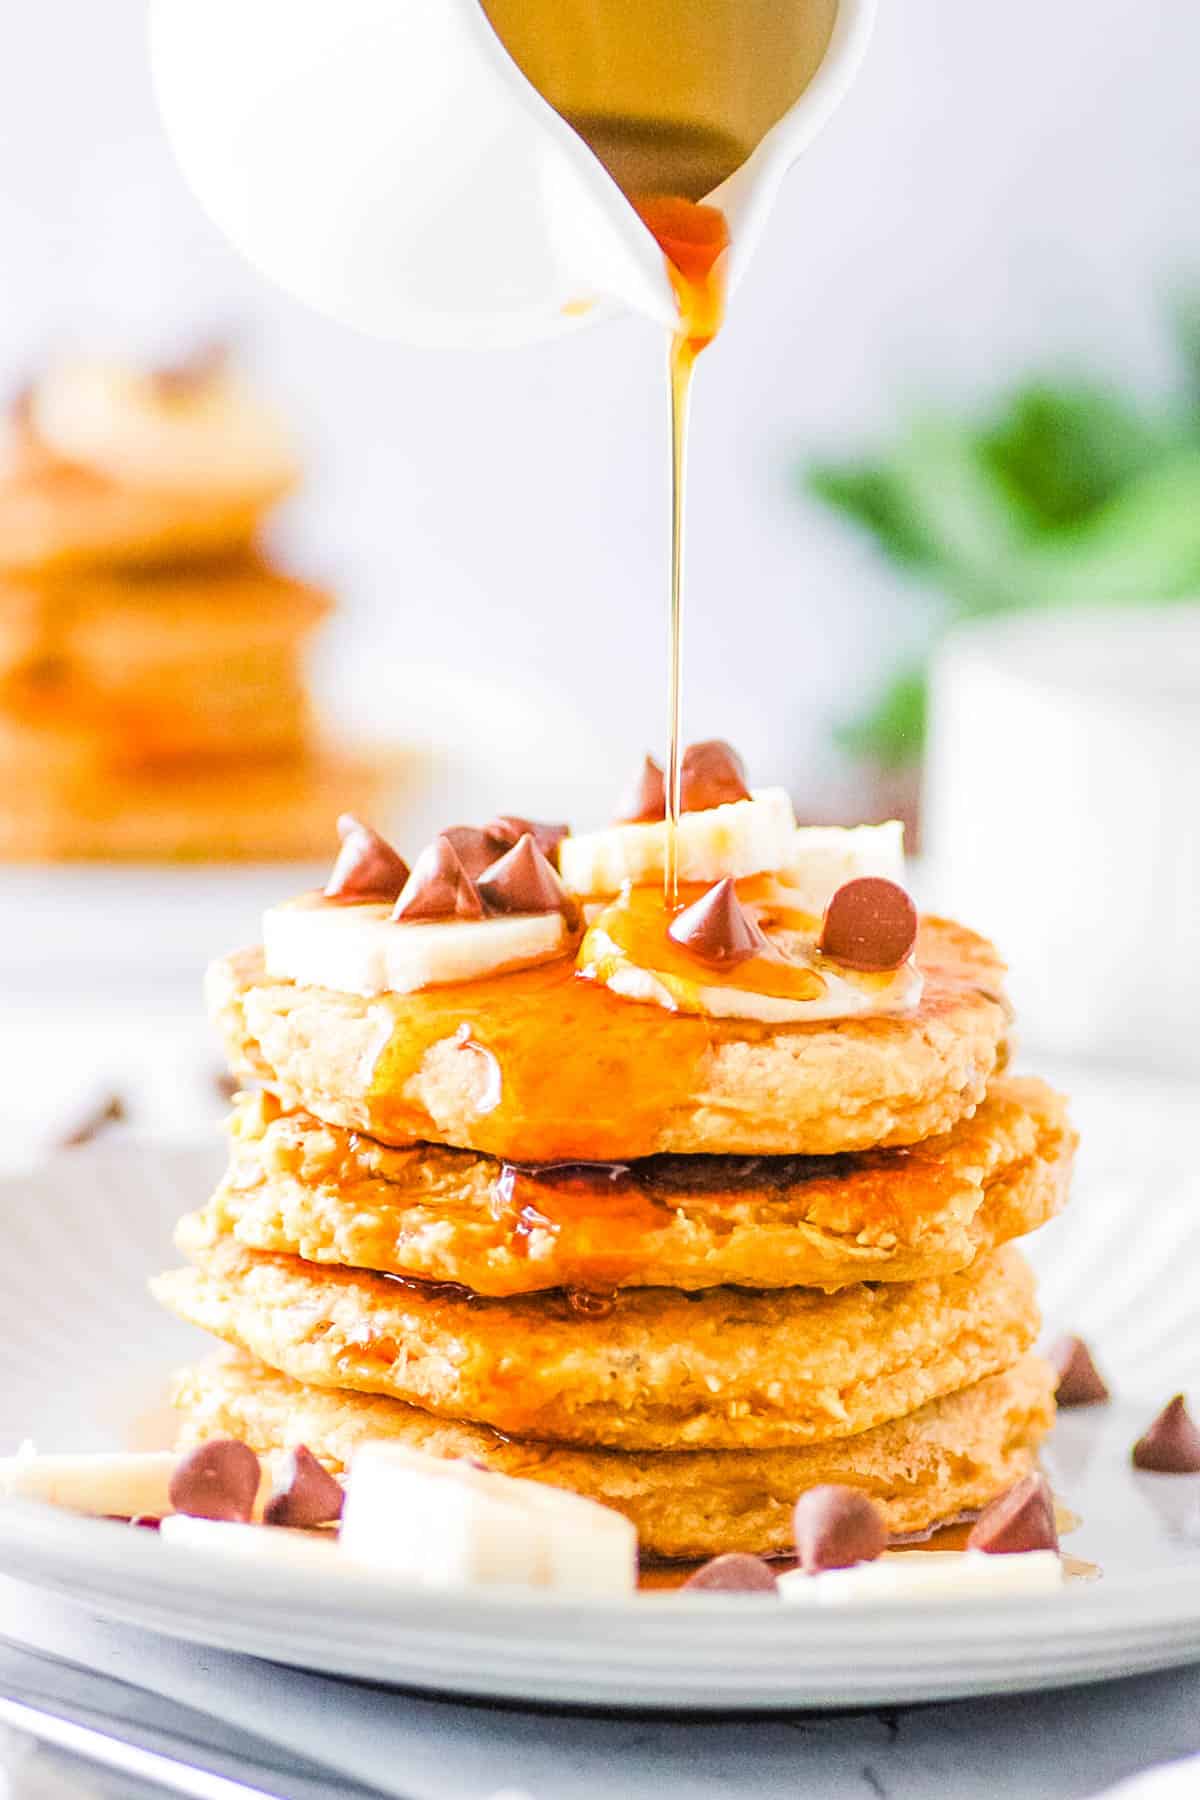 Stack of oat flour pancakes topped with chocolate chips, banana slices and maple syrup on a white plate.